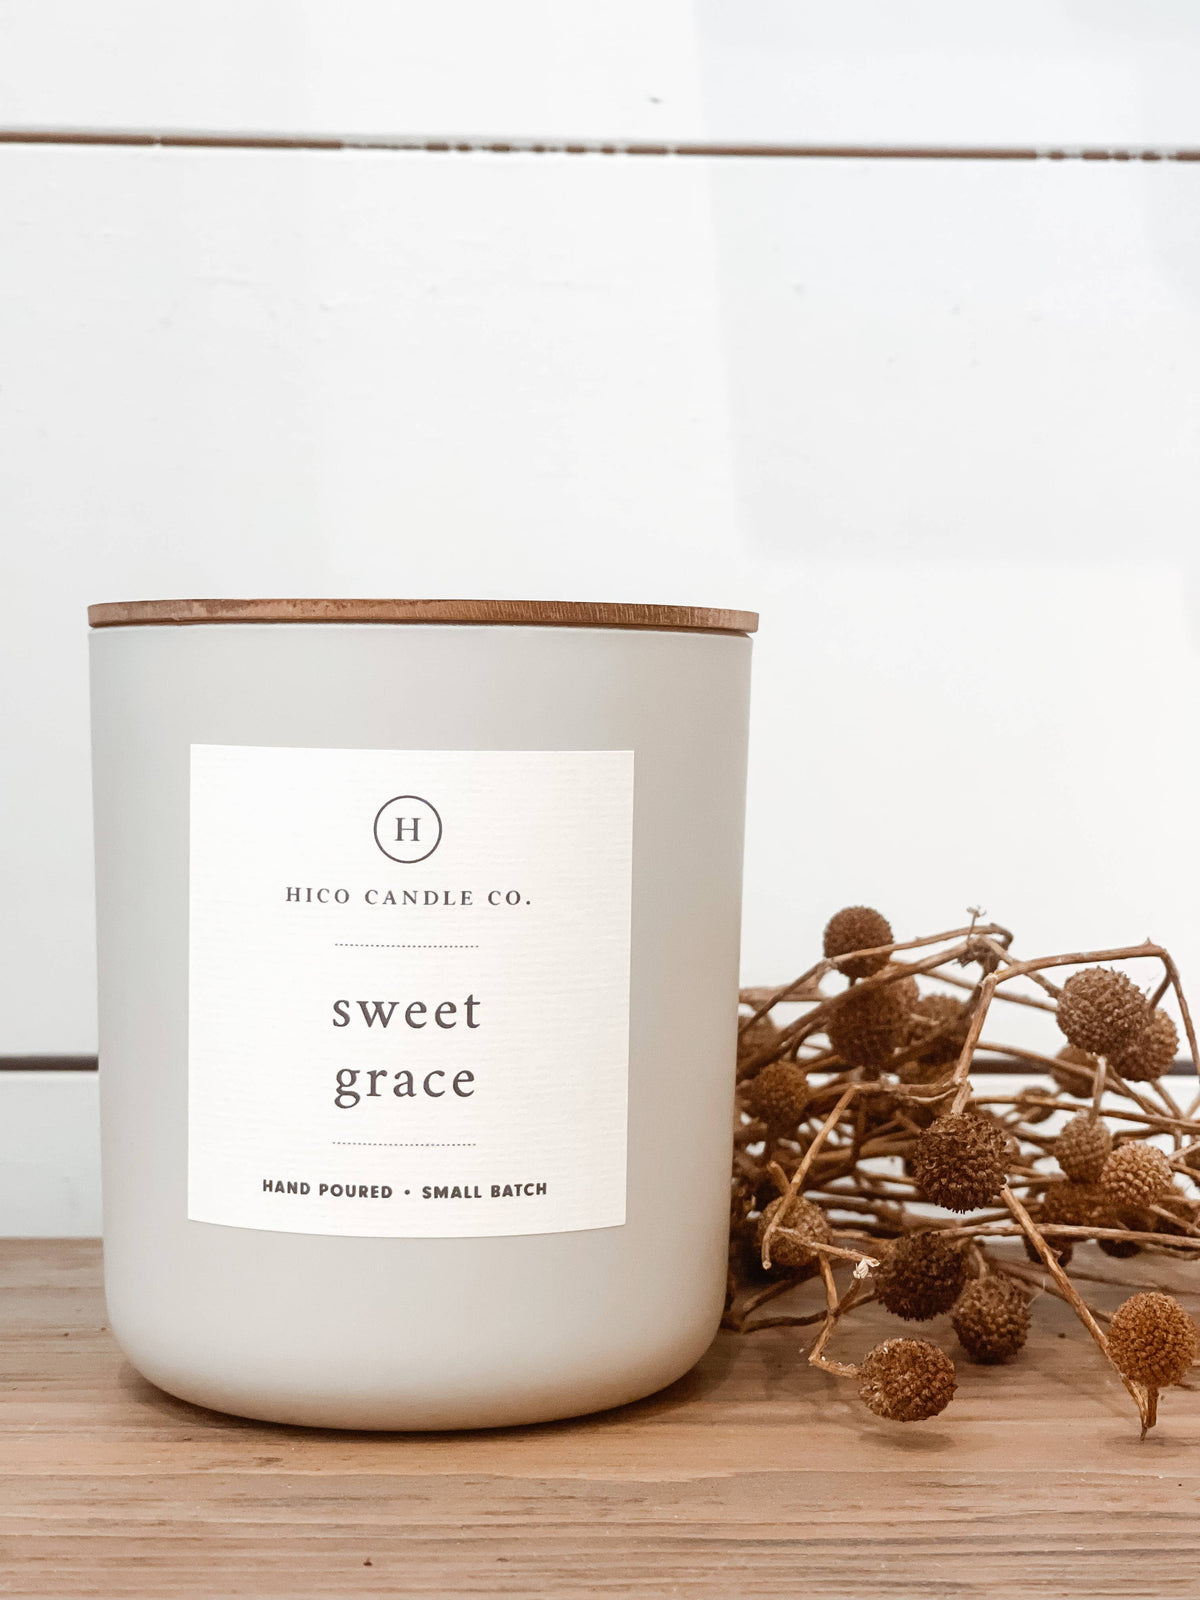 Hico Candle Co. - Sweet Grace